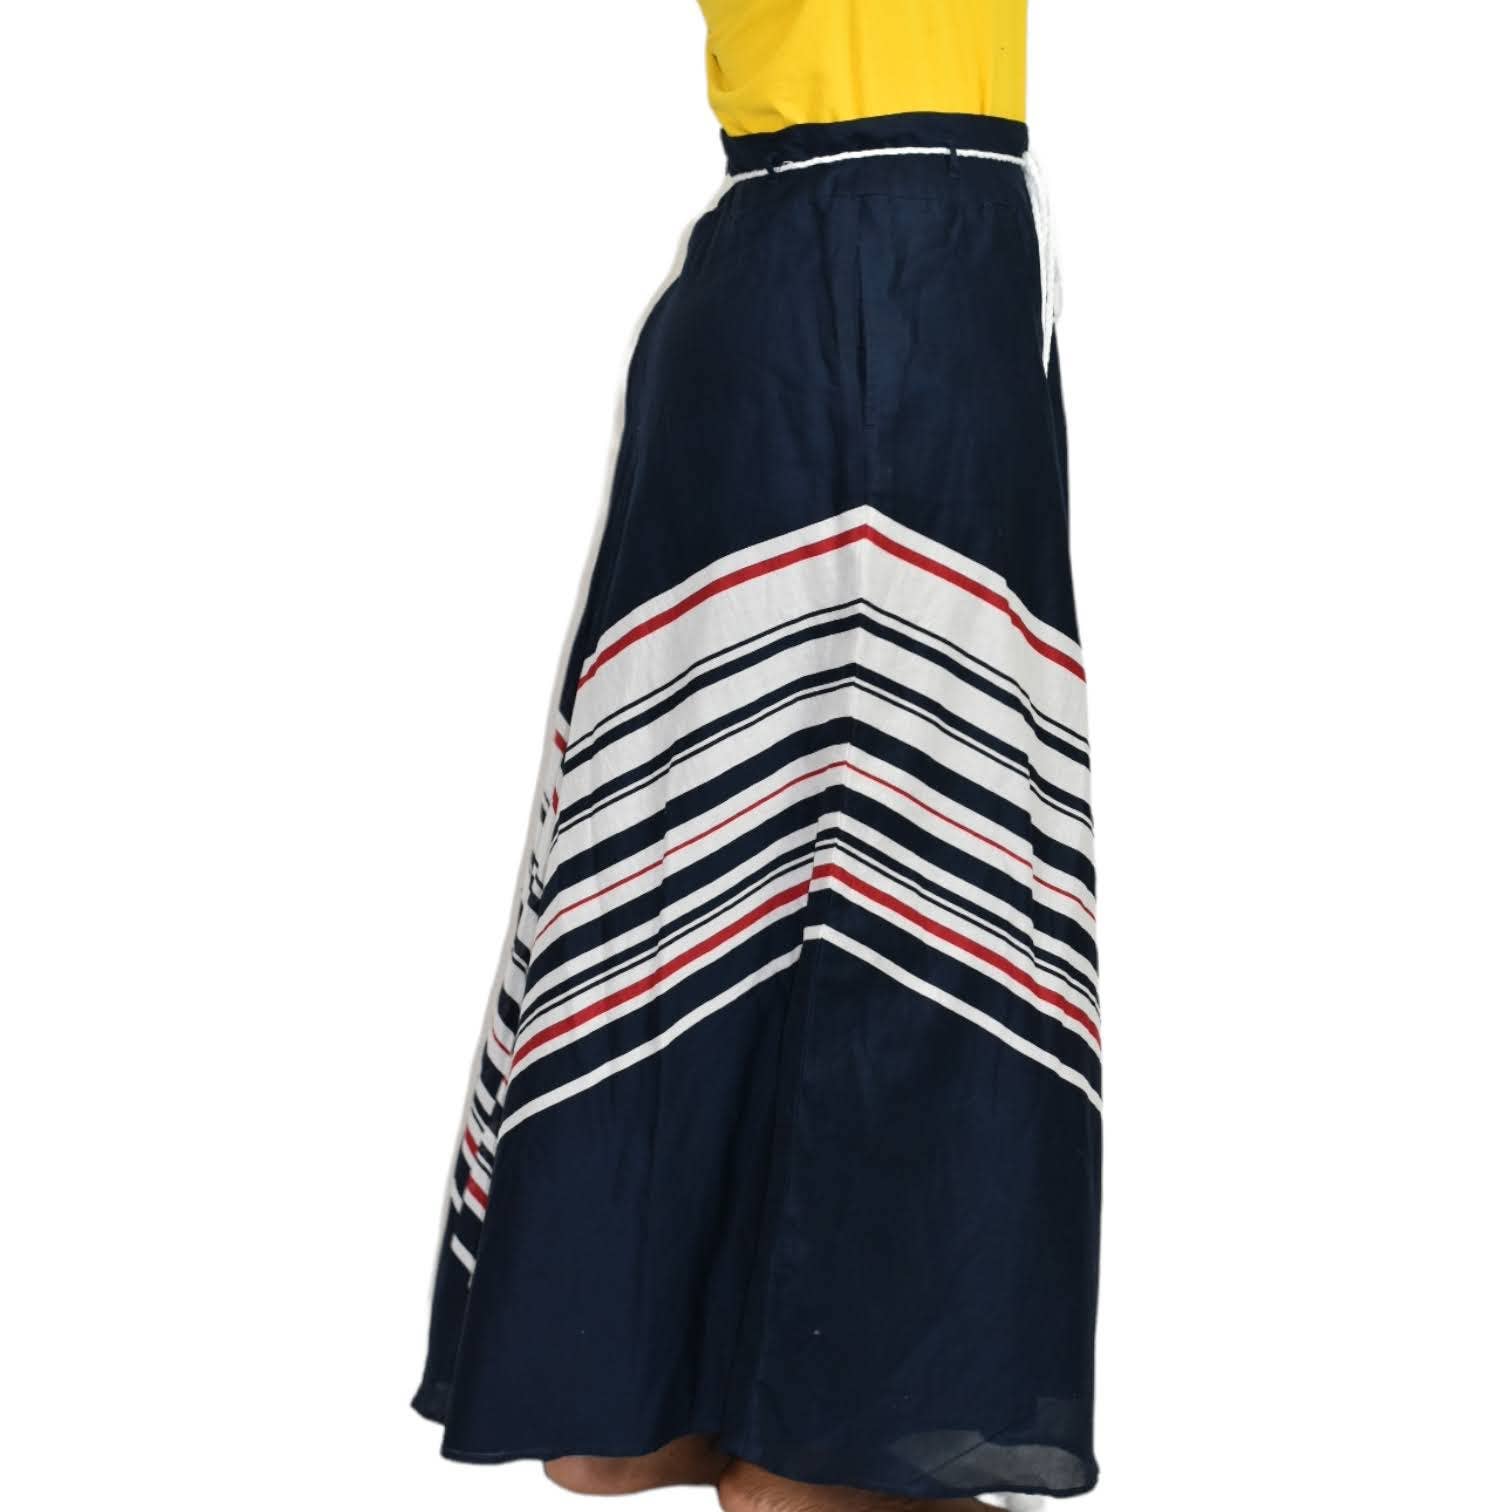 Tommy Hilfiger Chevron Printed Maxi Skirt Blue Red Nautical Cotton A-Line Size 4